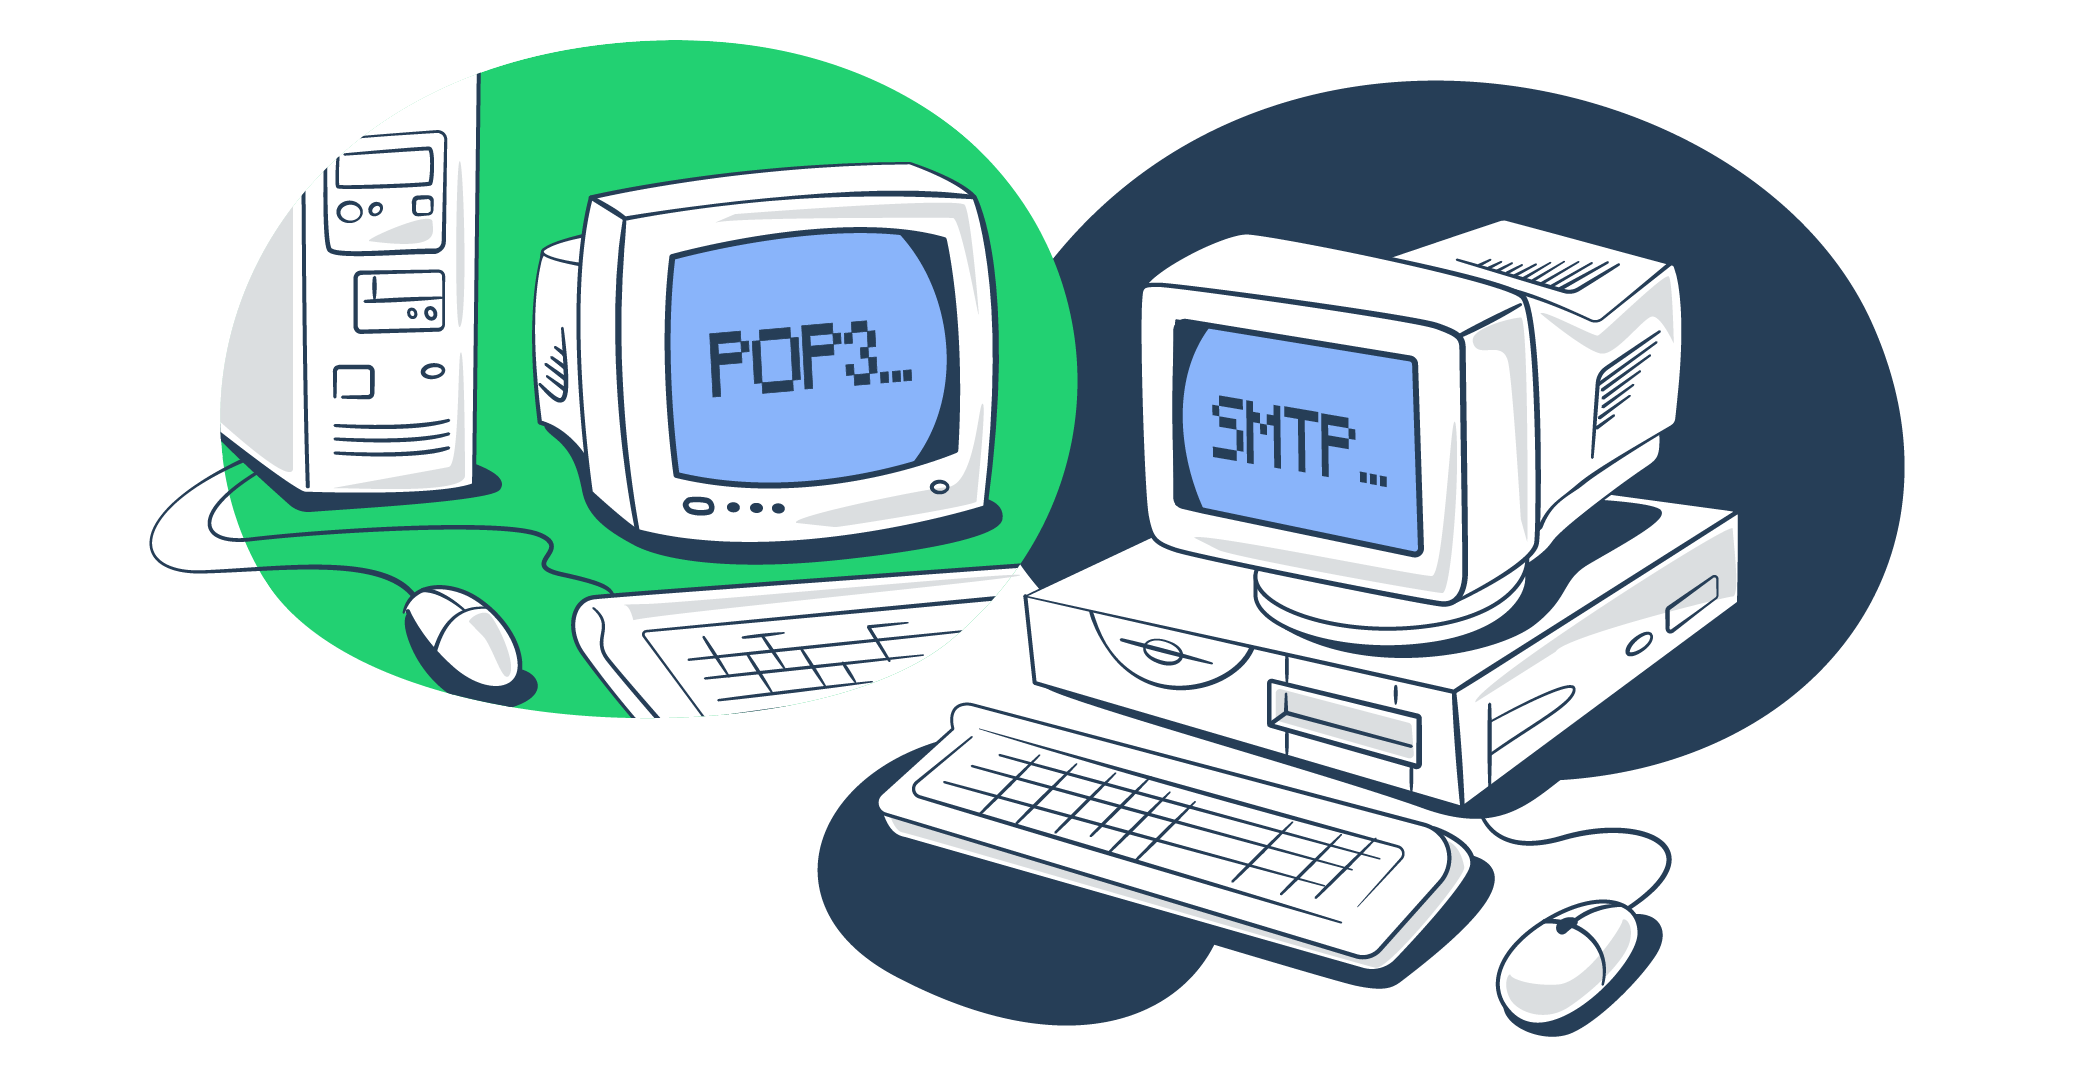 This is a cover image for an article that explains how POP3 and SMTP protocols work and the difference between them.